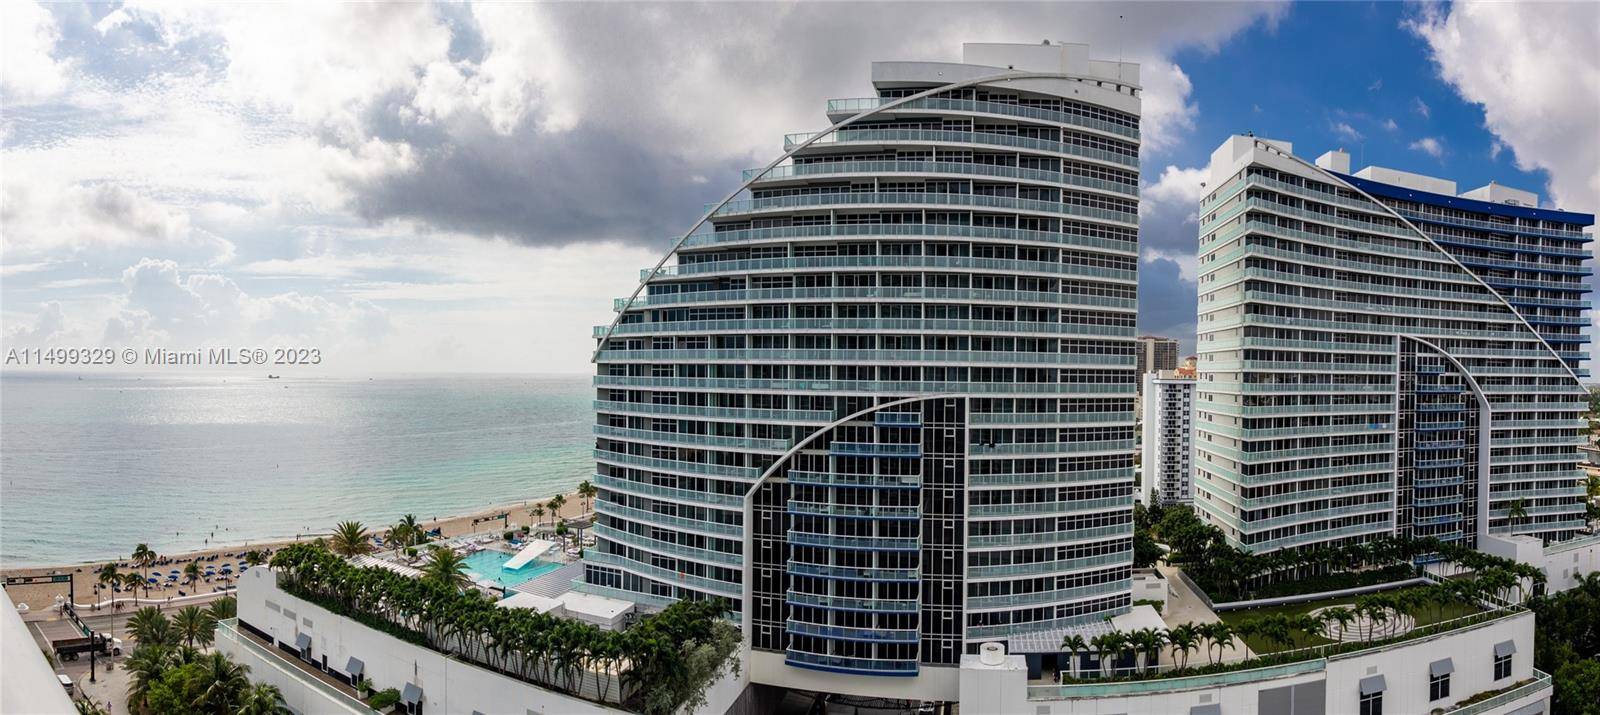 Discover unparalleled luxury condo hotel resort in the heart of Fort Lauderdale's vibrant beachfront.